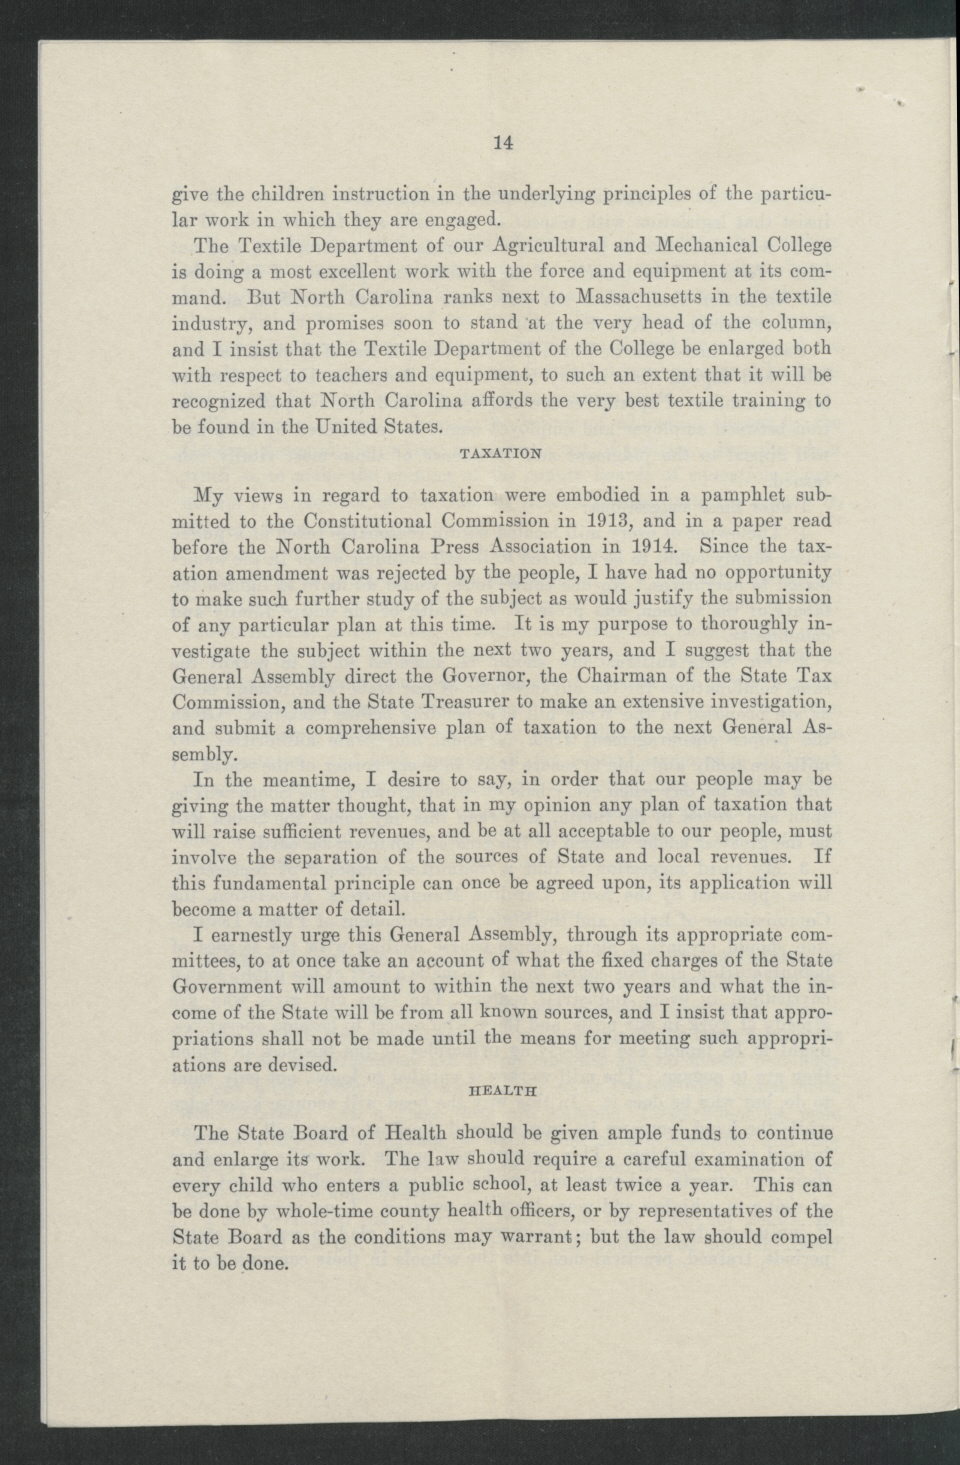 Inaugural Address of Governor Thomas W. Bickett to the General Assembly, January 11, 1917, page 12